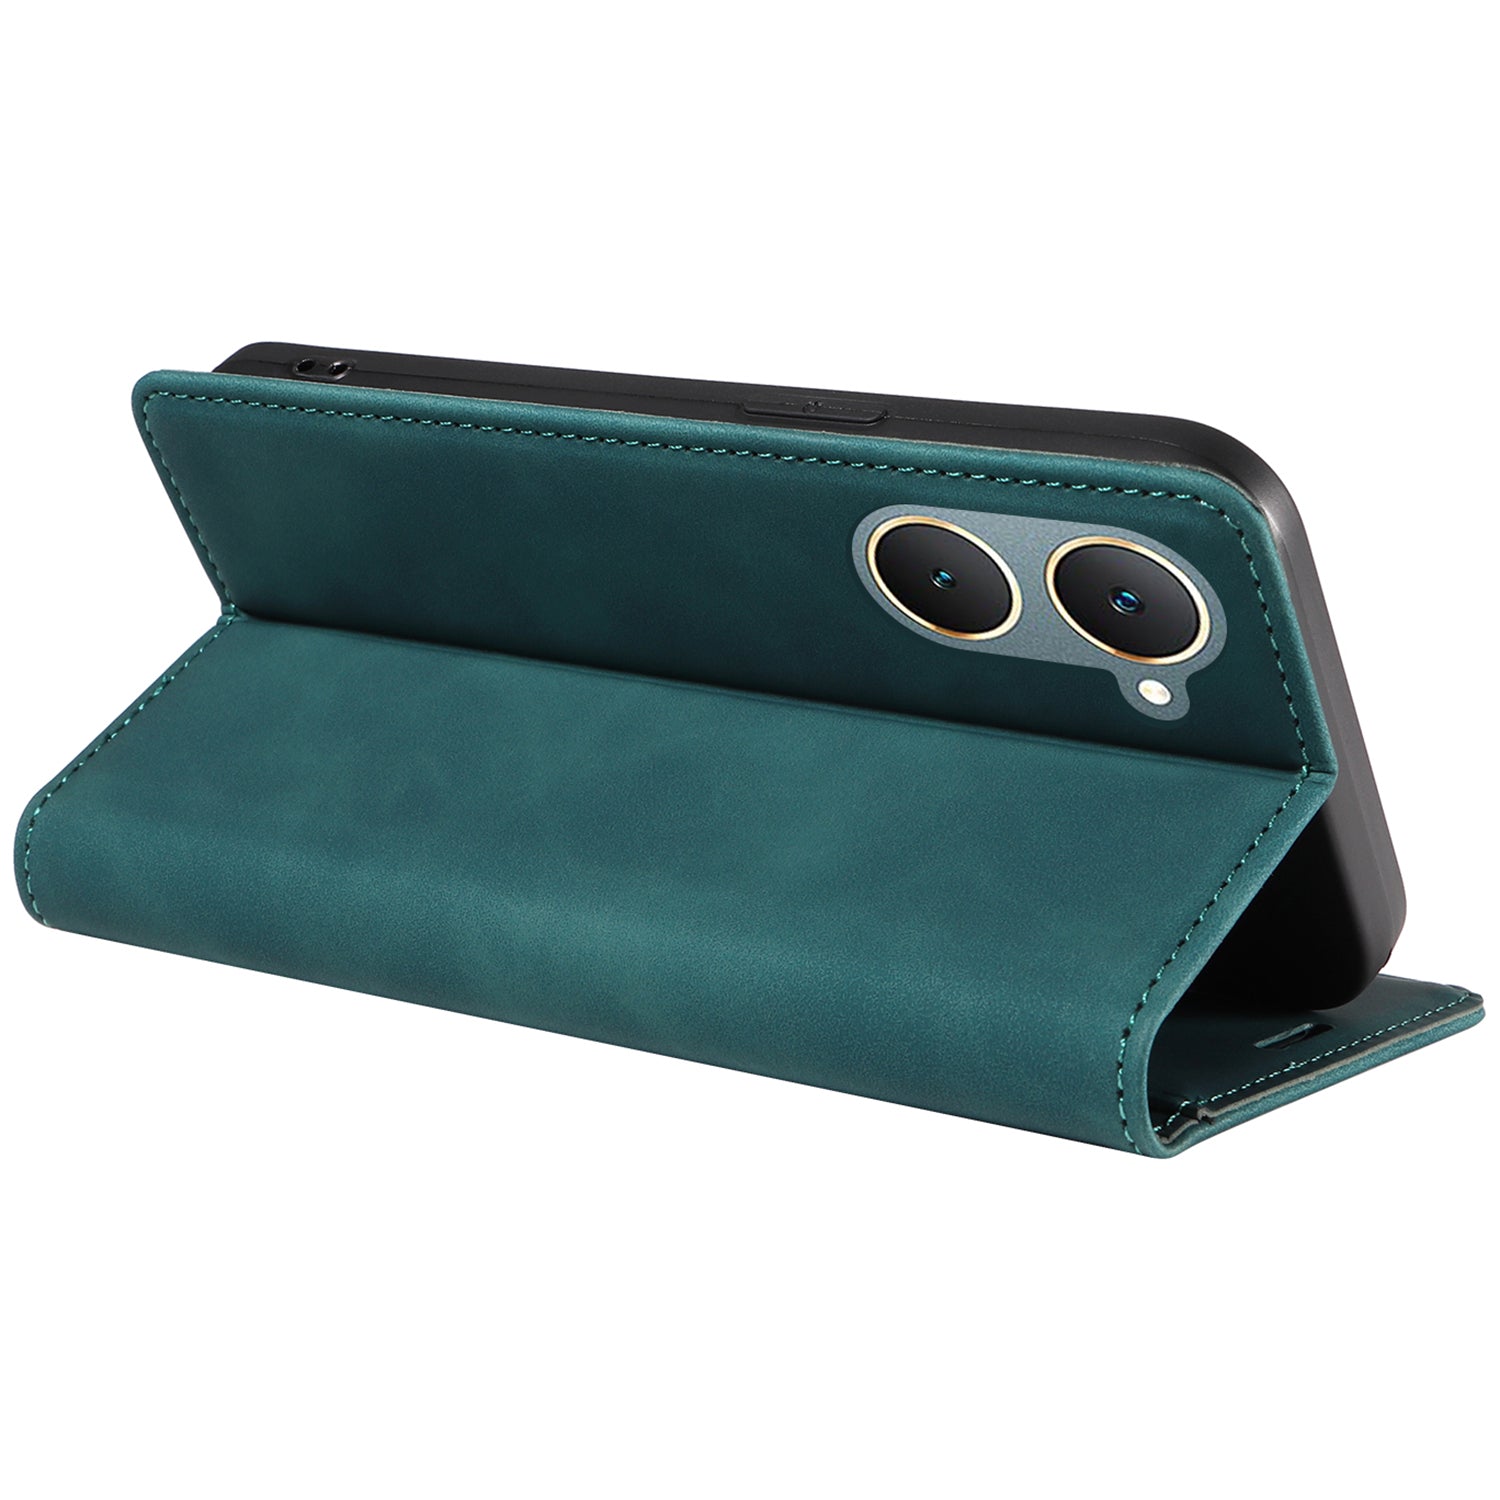 BETOPNICE 003 For vivo Y03 Case RFID Blocking Wallet Leather Flip Phone Cover - Green